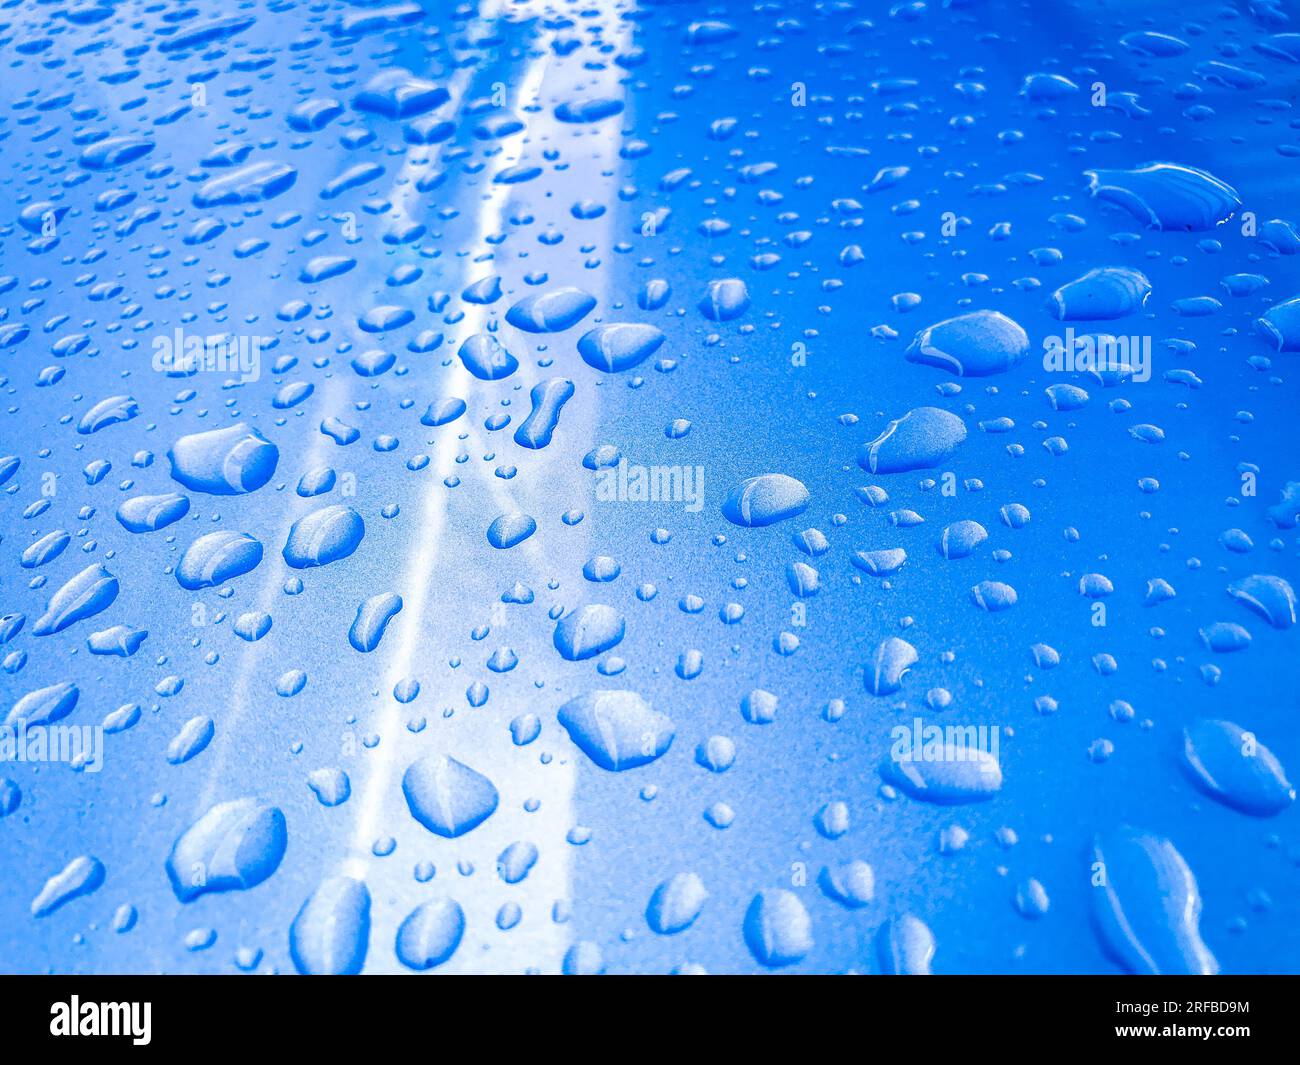 Droplets on car coloring background Stock Photo